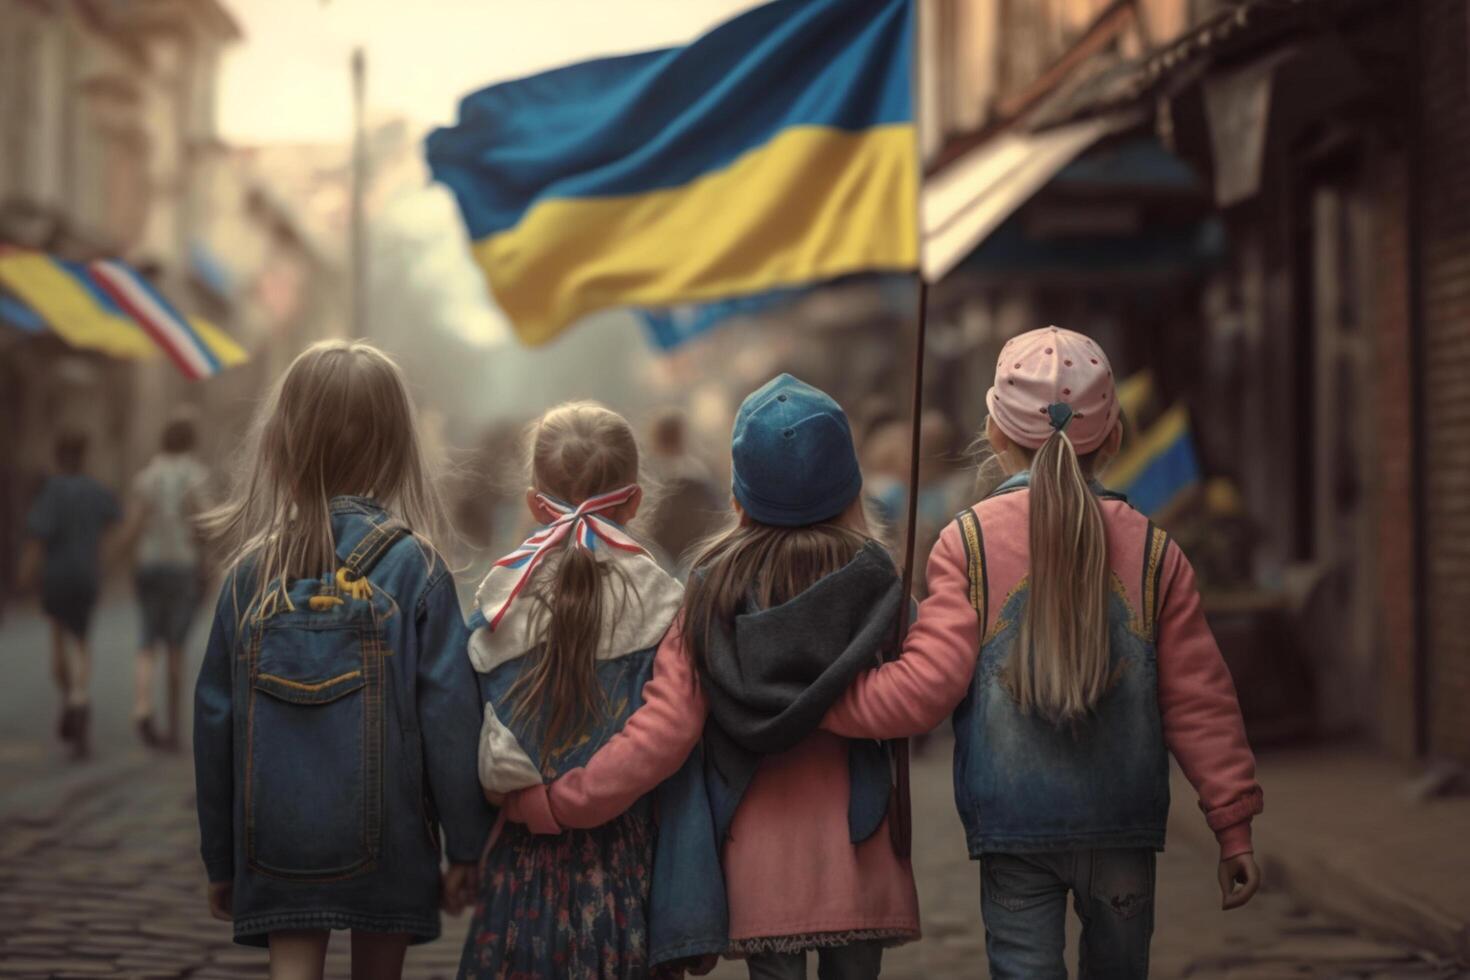 Marching for Liberty Children Carrying Ukrainian Flags Through the Streets as a Symbol of Freedom photo